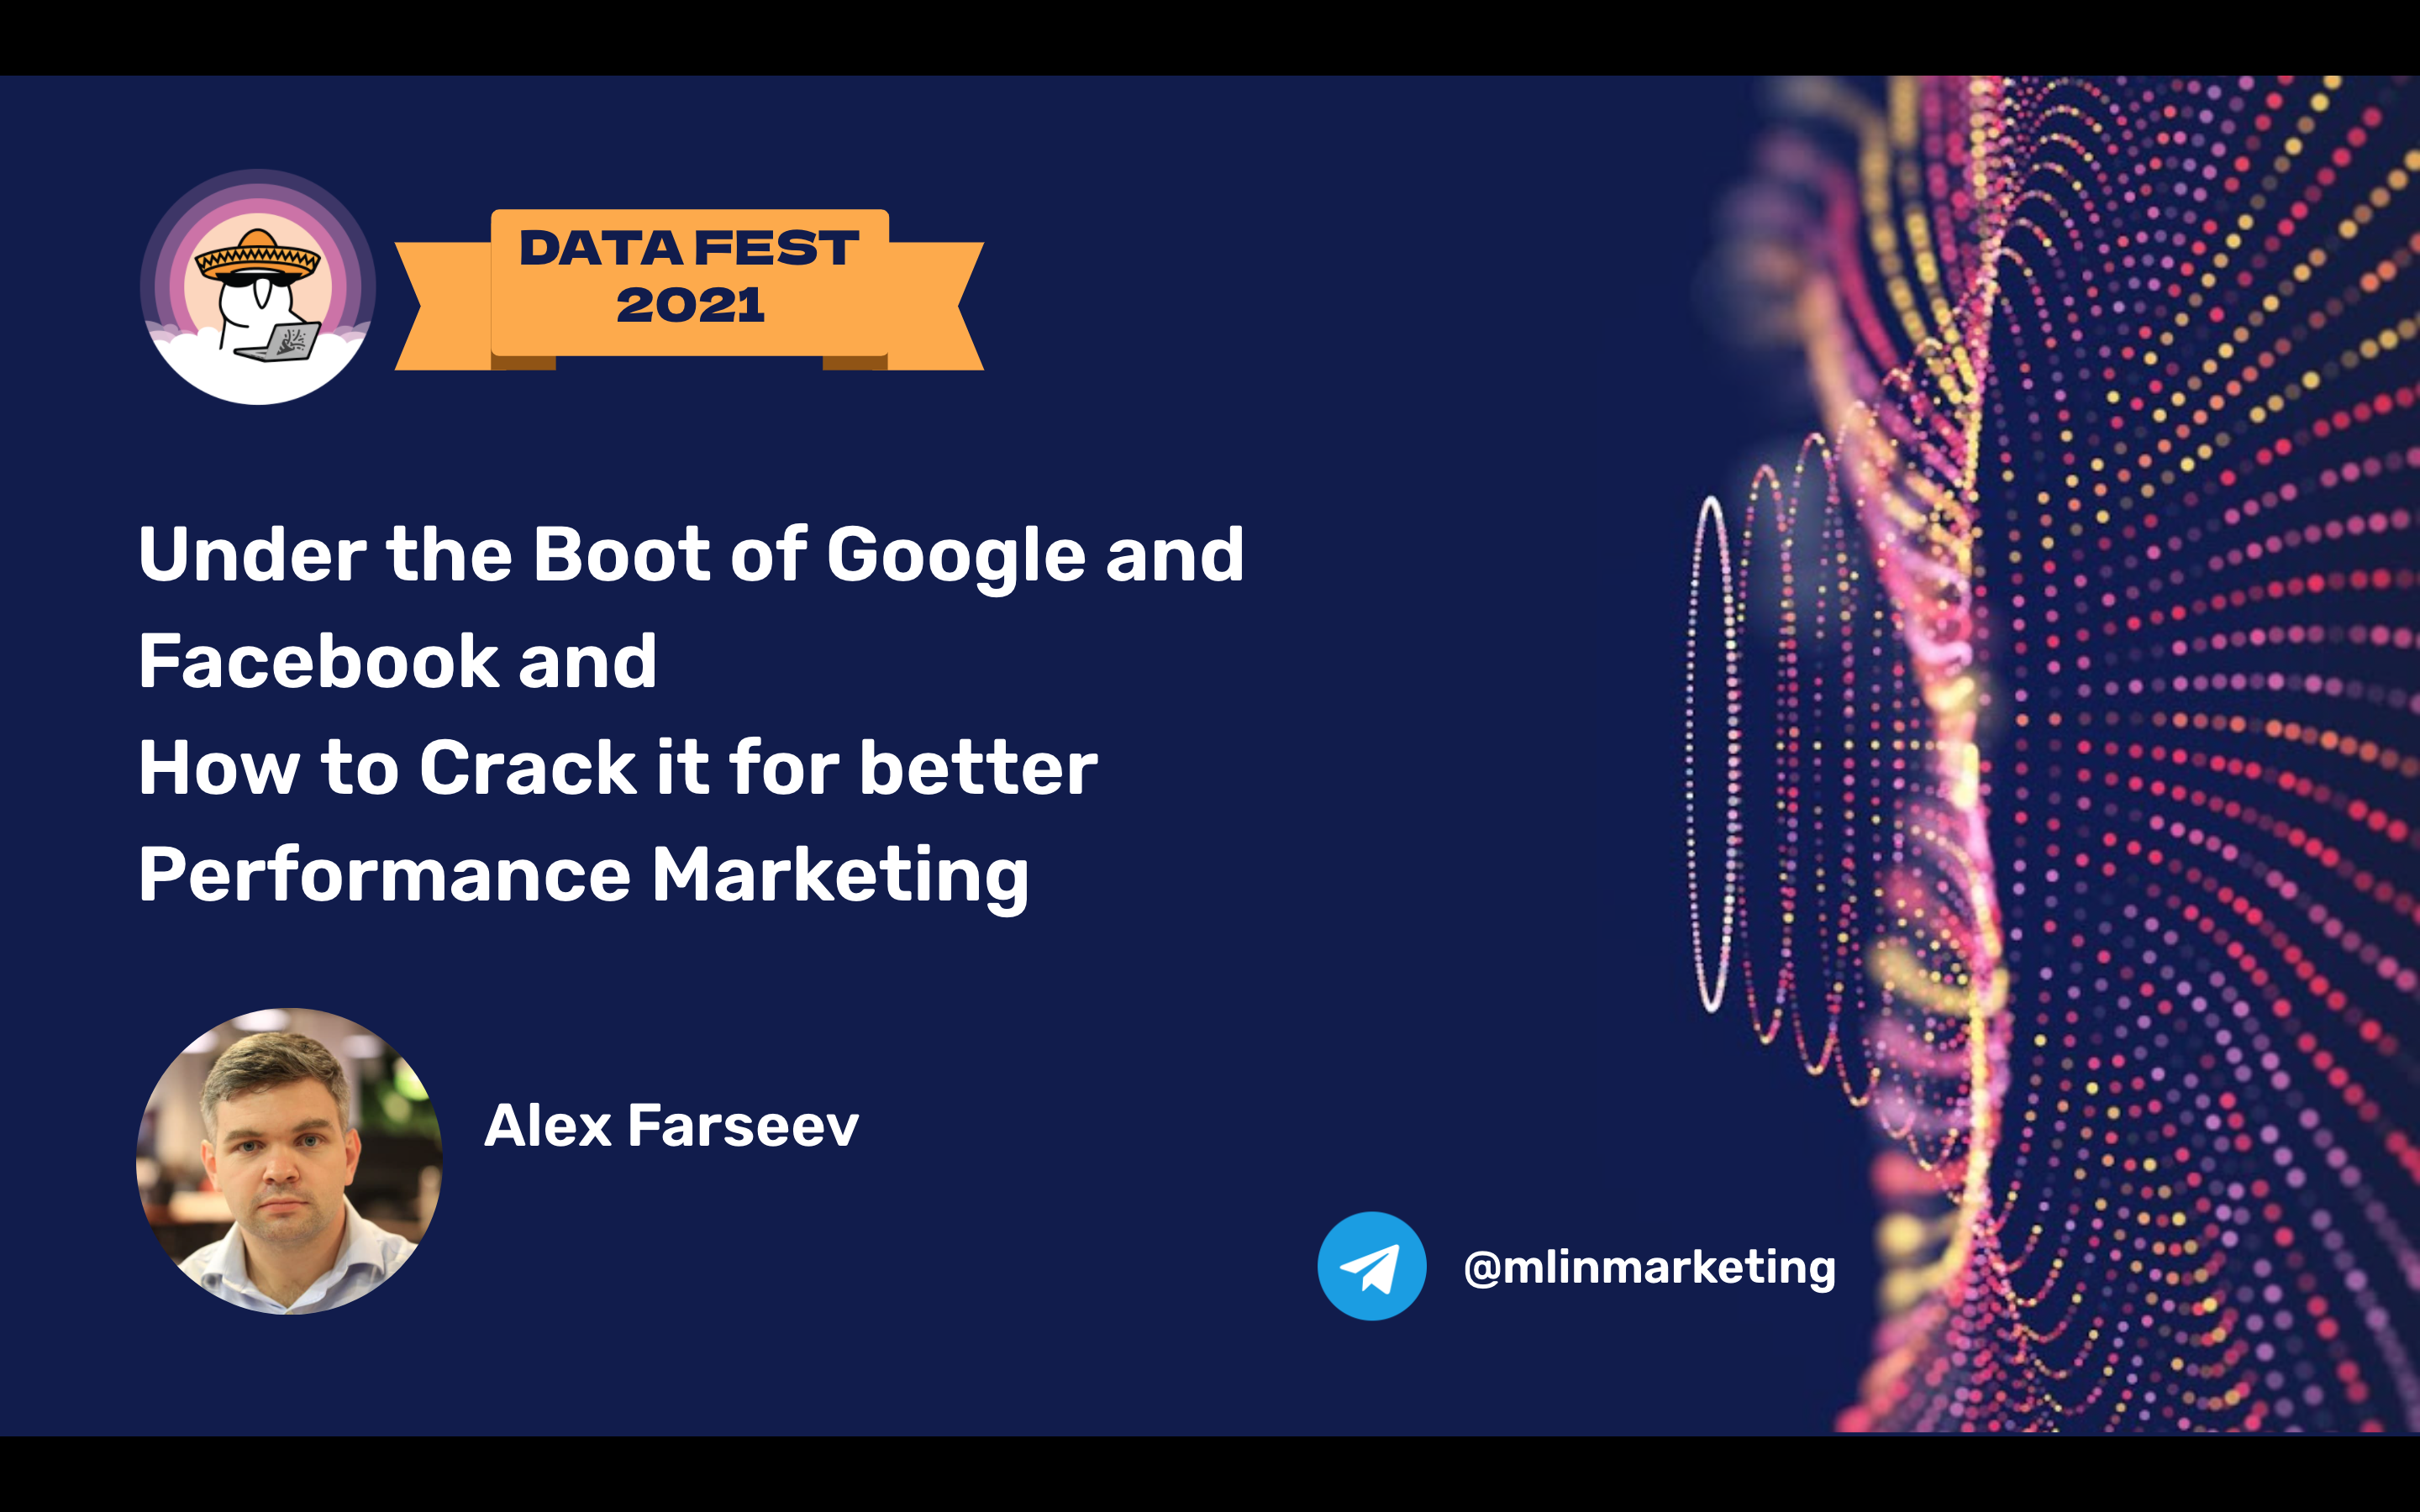 Under the Boot of Google and Facebook and How to Crack it for better Performance